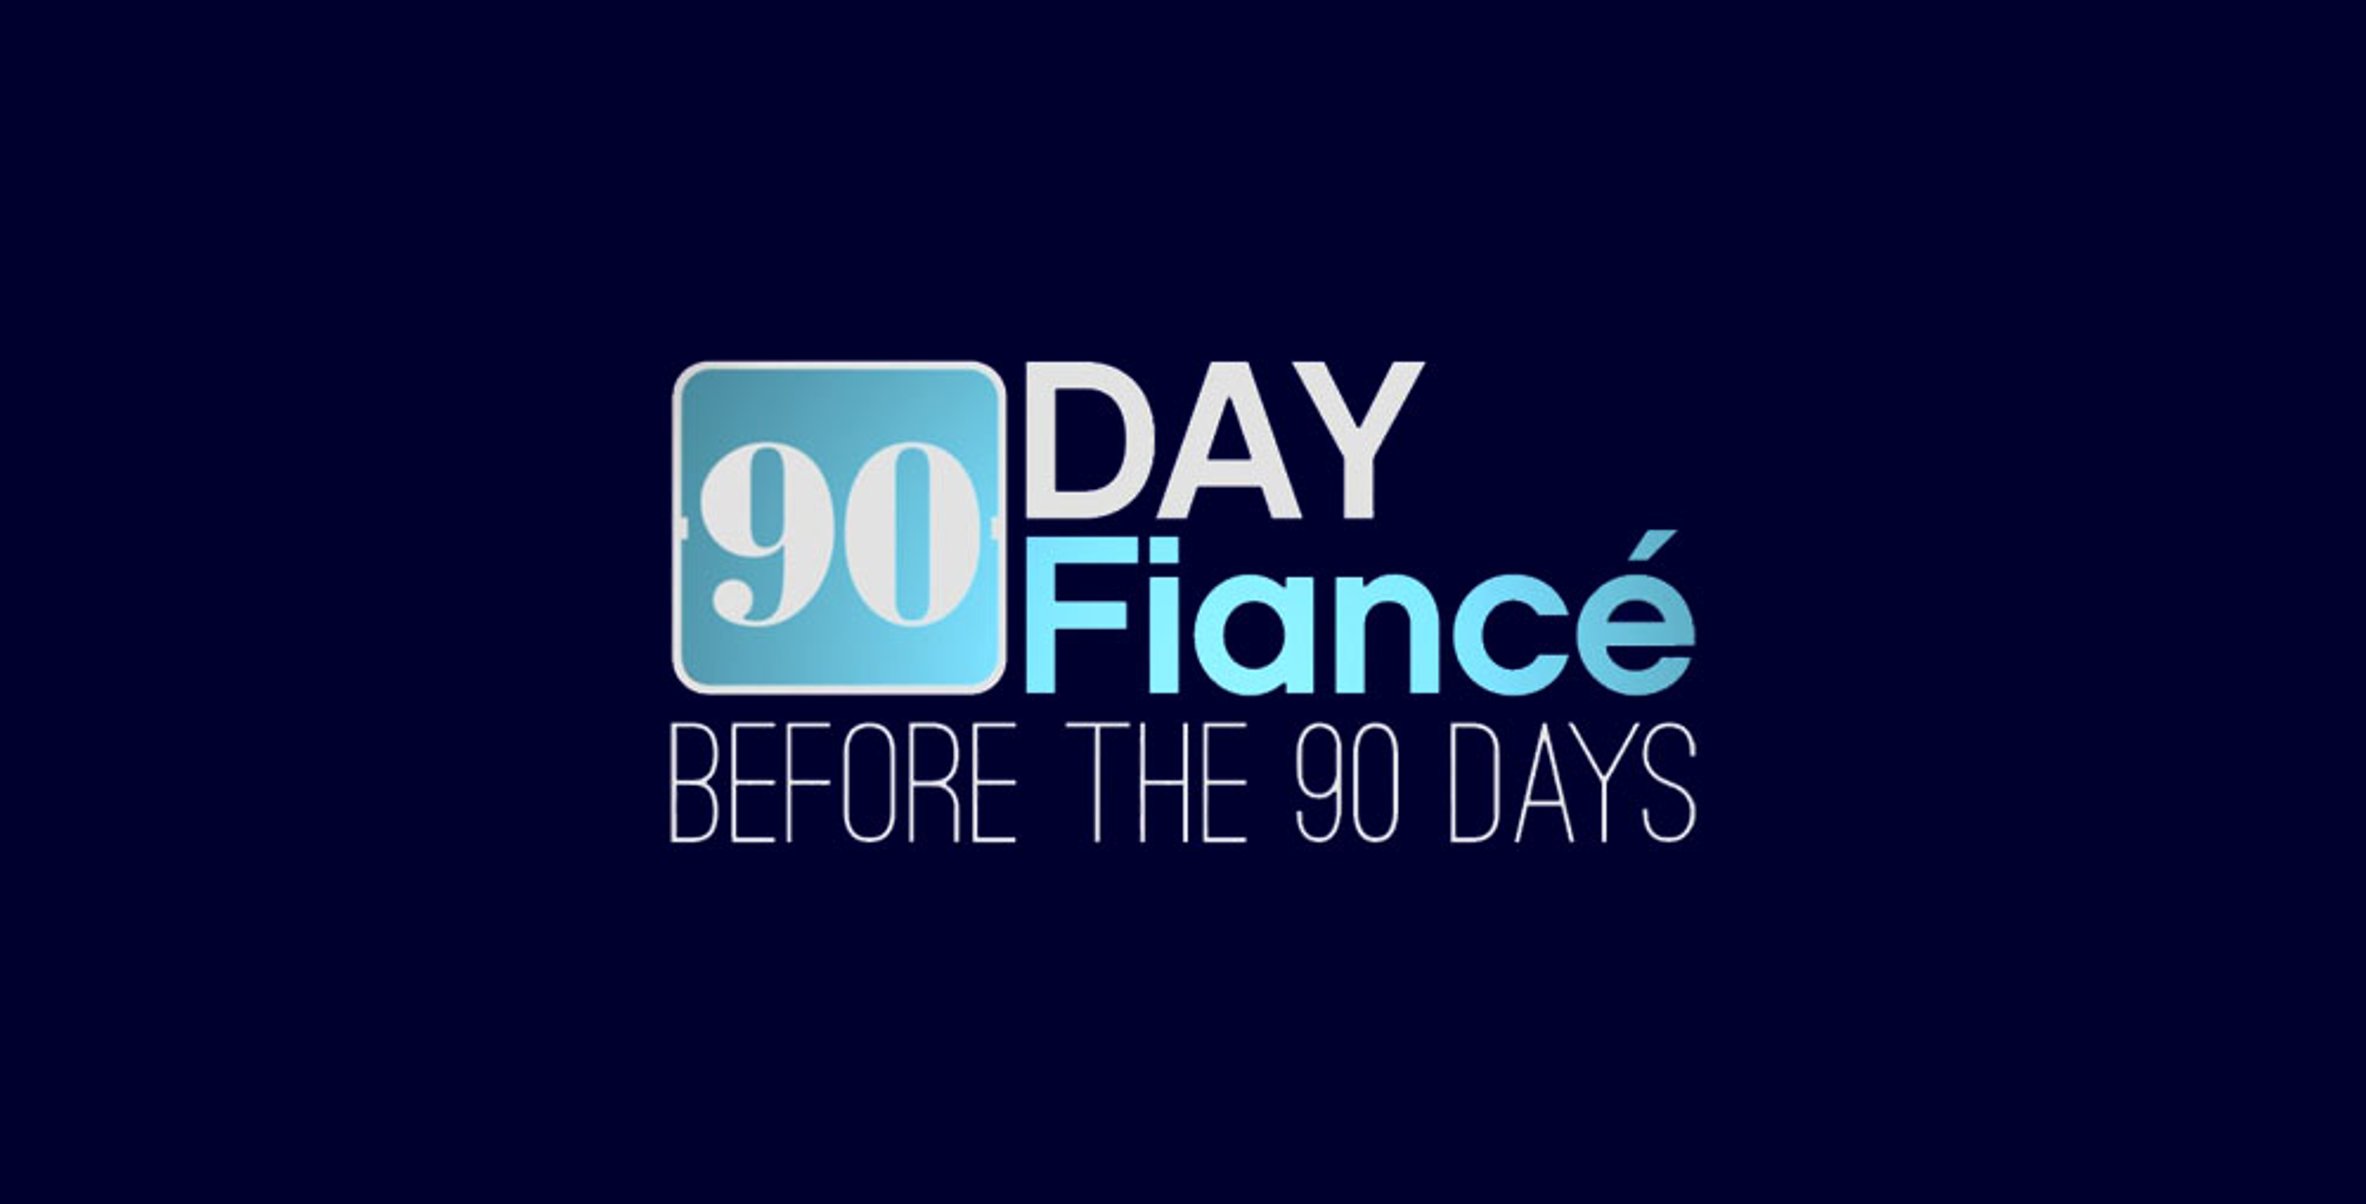 Casting 90 Day Fiance: Before the 90 Days